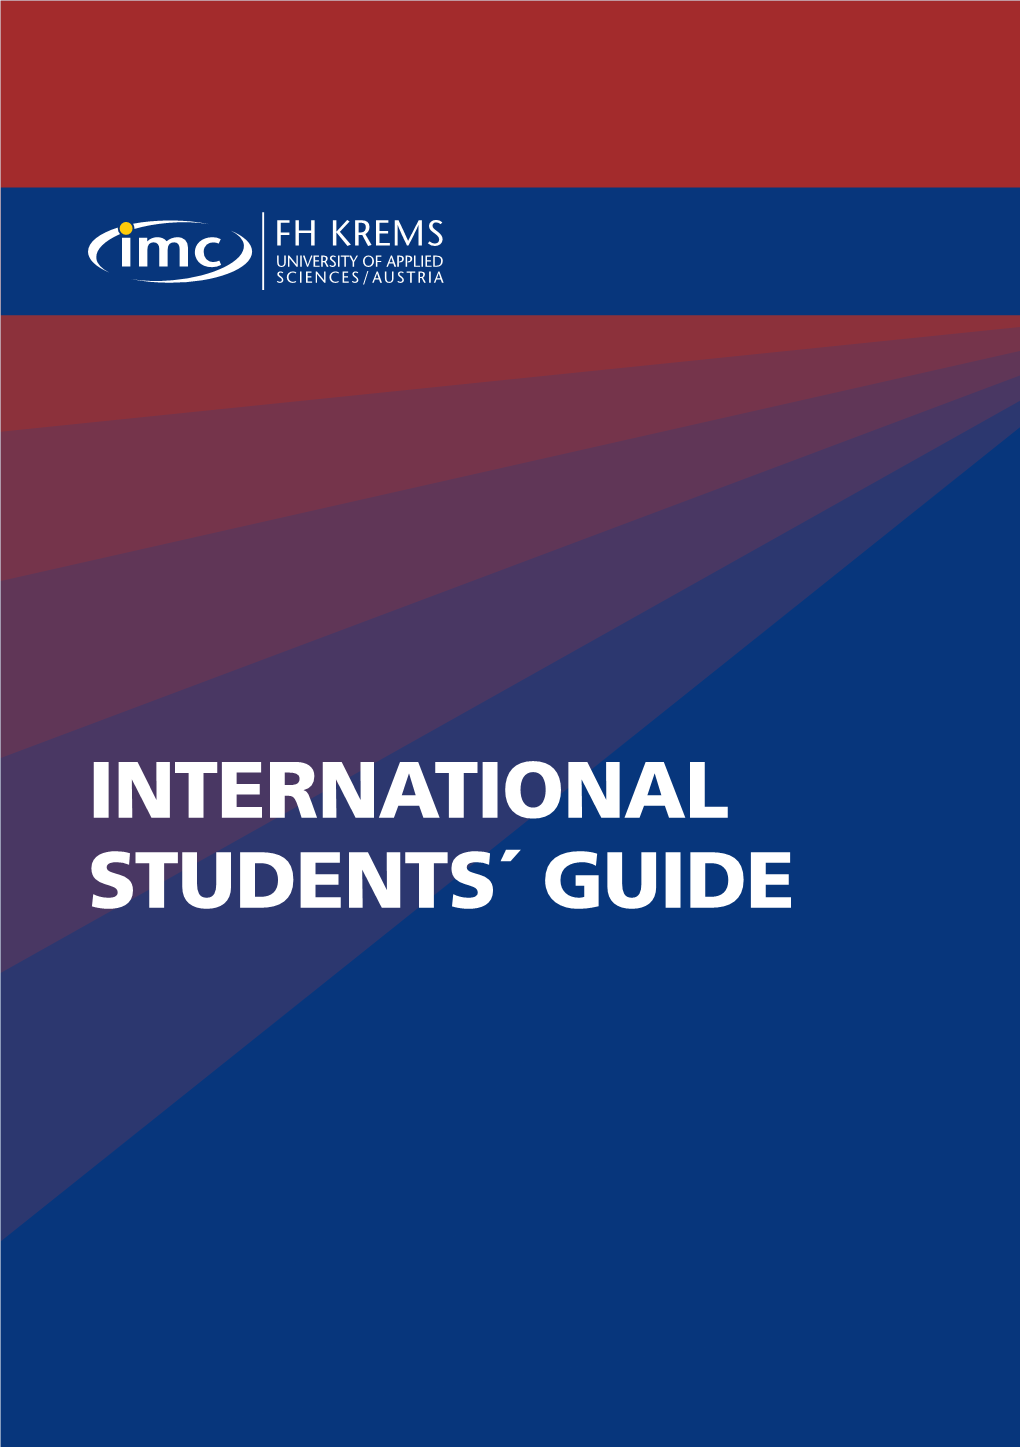 INTERNATIONAL STUDENTS´ GUIDE FHR-5-0007 Vers.05 Rev.00 2014 2 WELCOME to the IMC UNIVERSITY of APPLIED SCIENCES